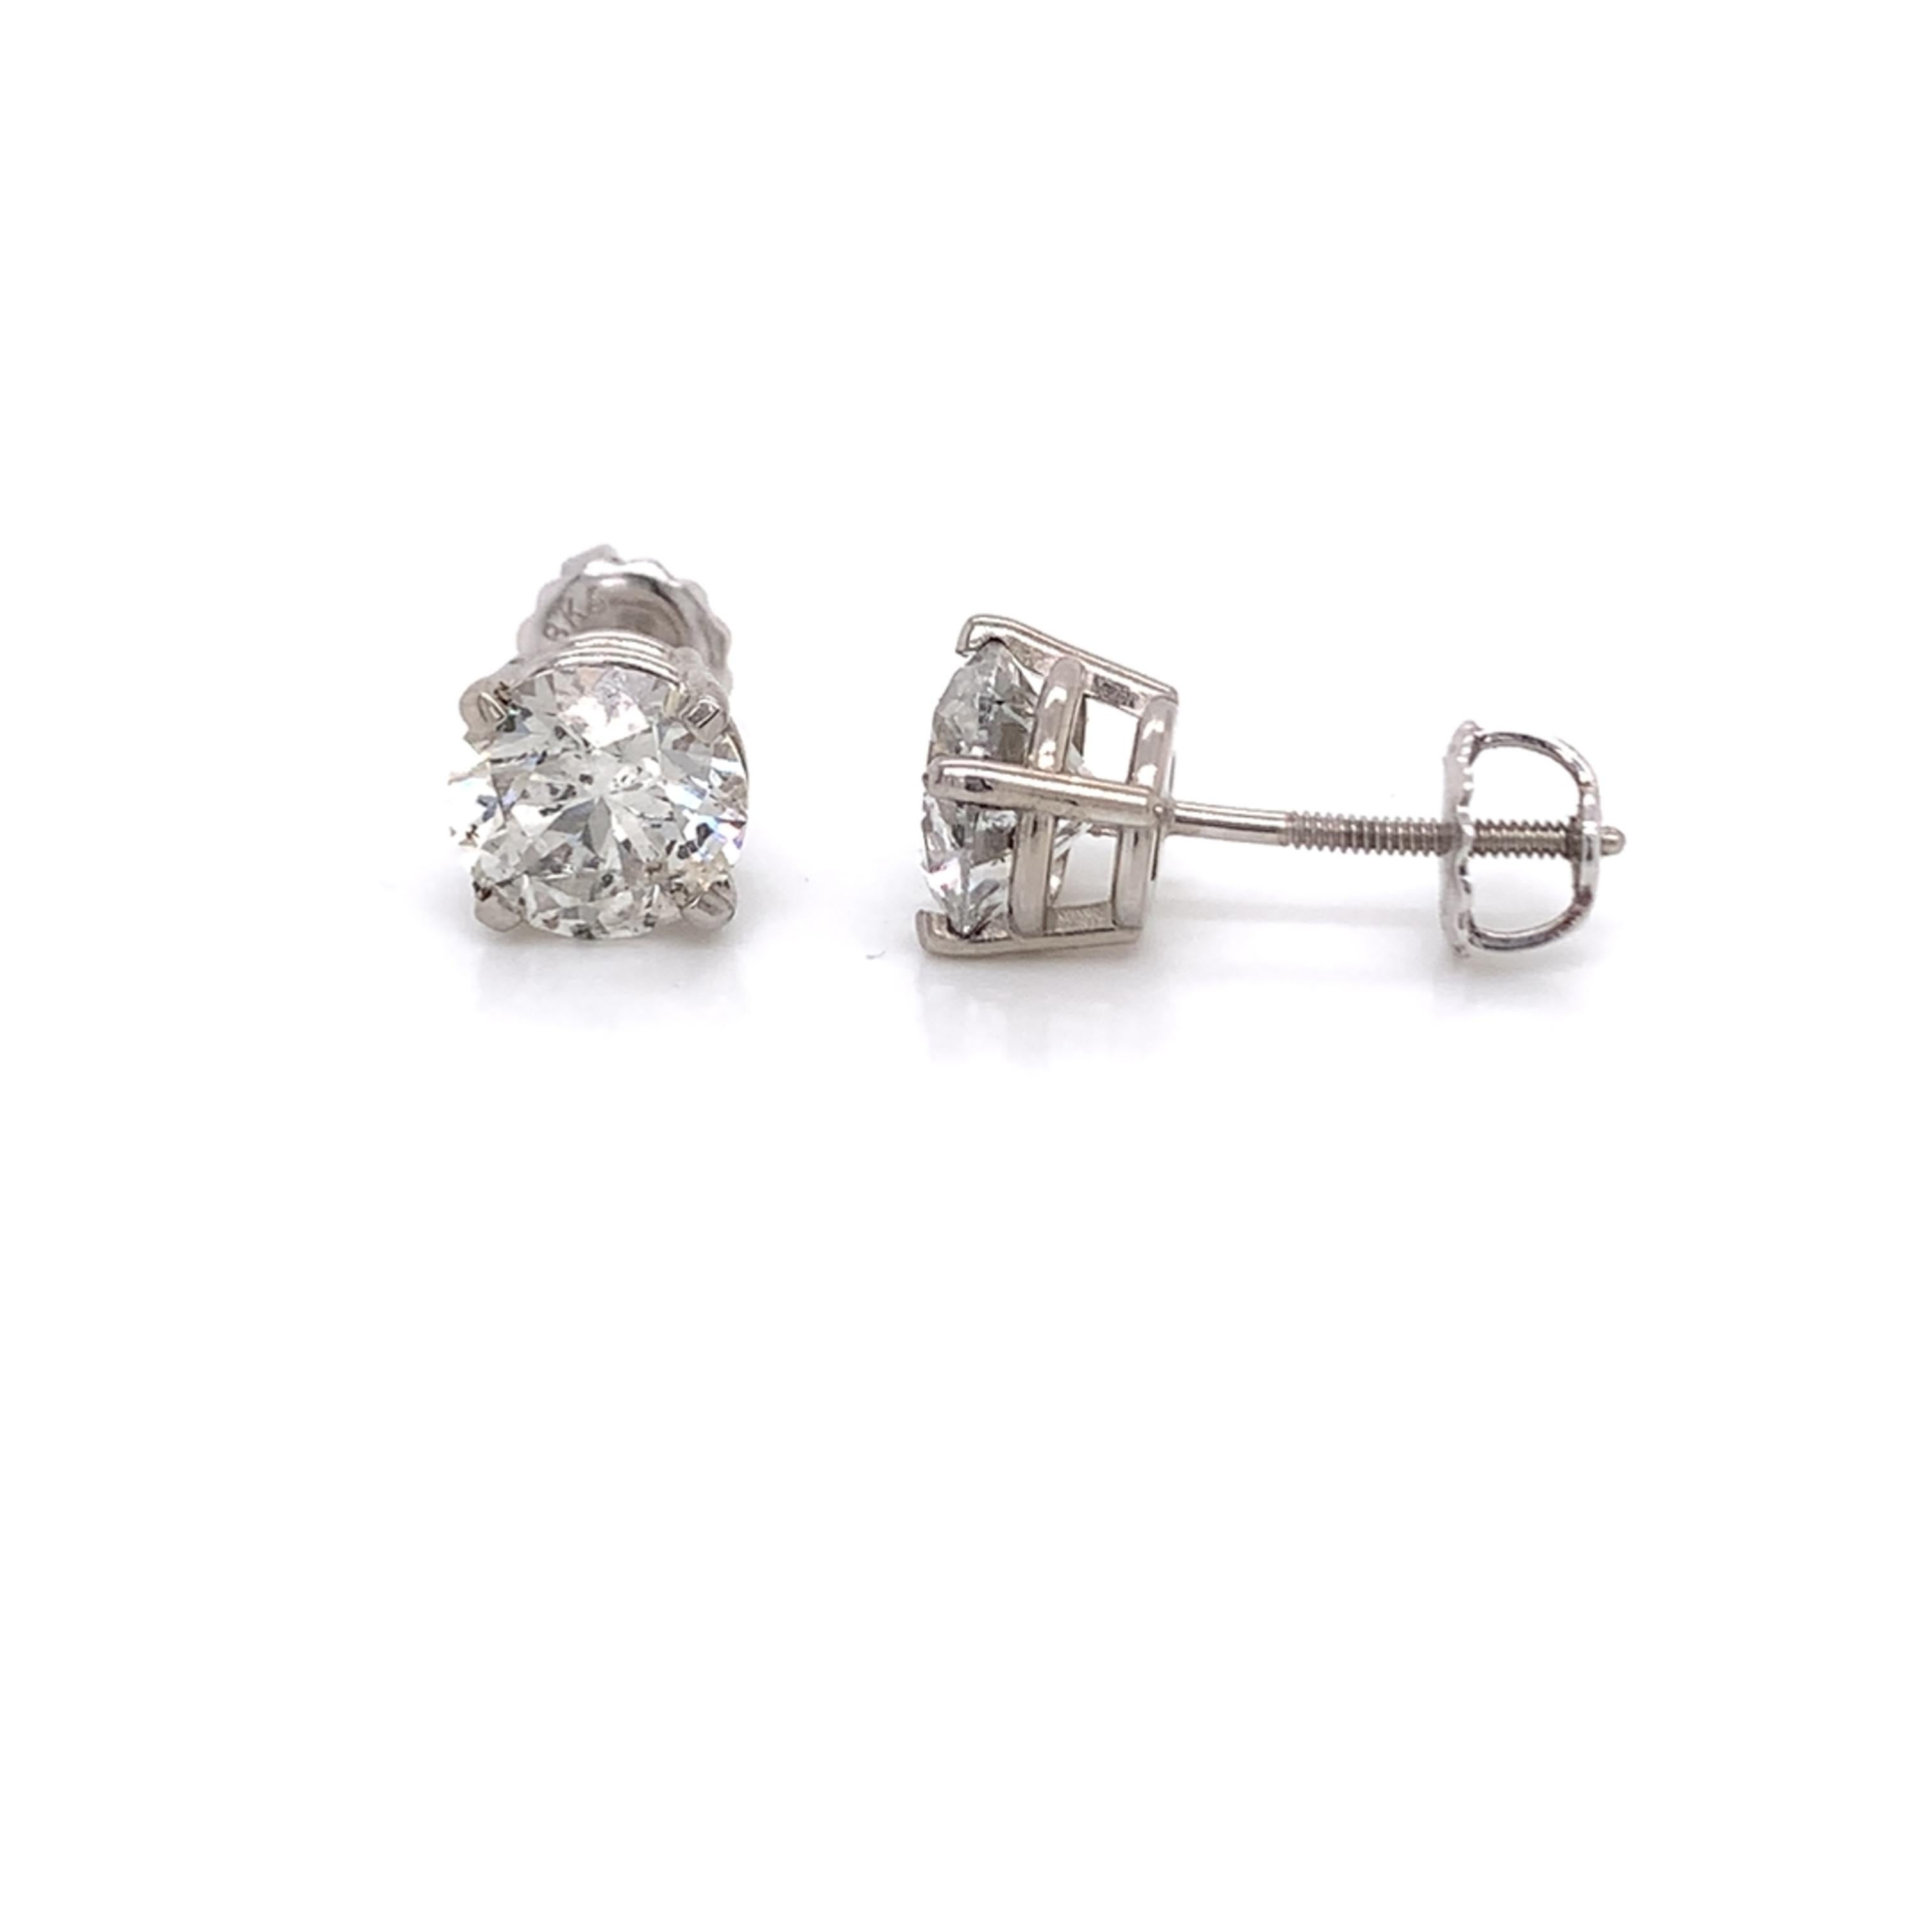 Diamond stud earrings made with real/natural brilliant cut diamonds. Total Diamond Weight: 3.02 carats. Diamond Quantity: 2 round diamonds. Color: F-G.  Clarity: I1. Mounted on 18kt white gold screw-back setting.